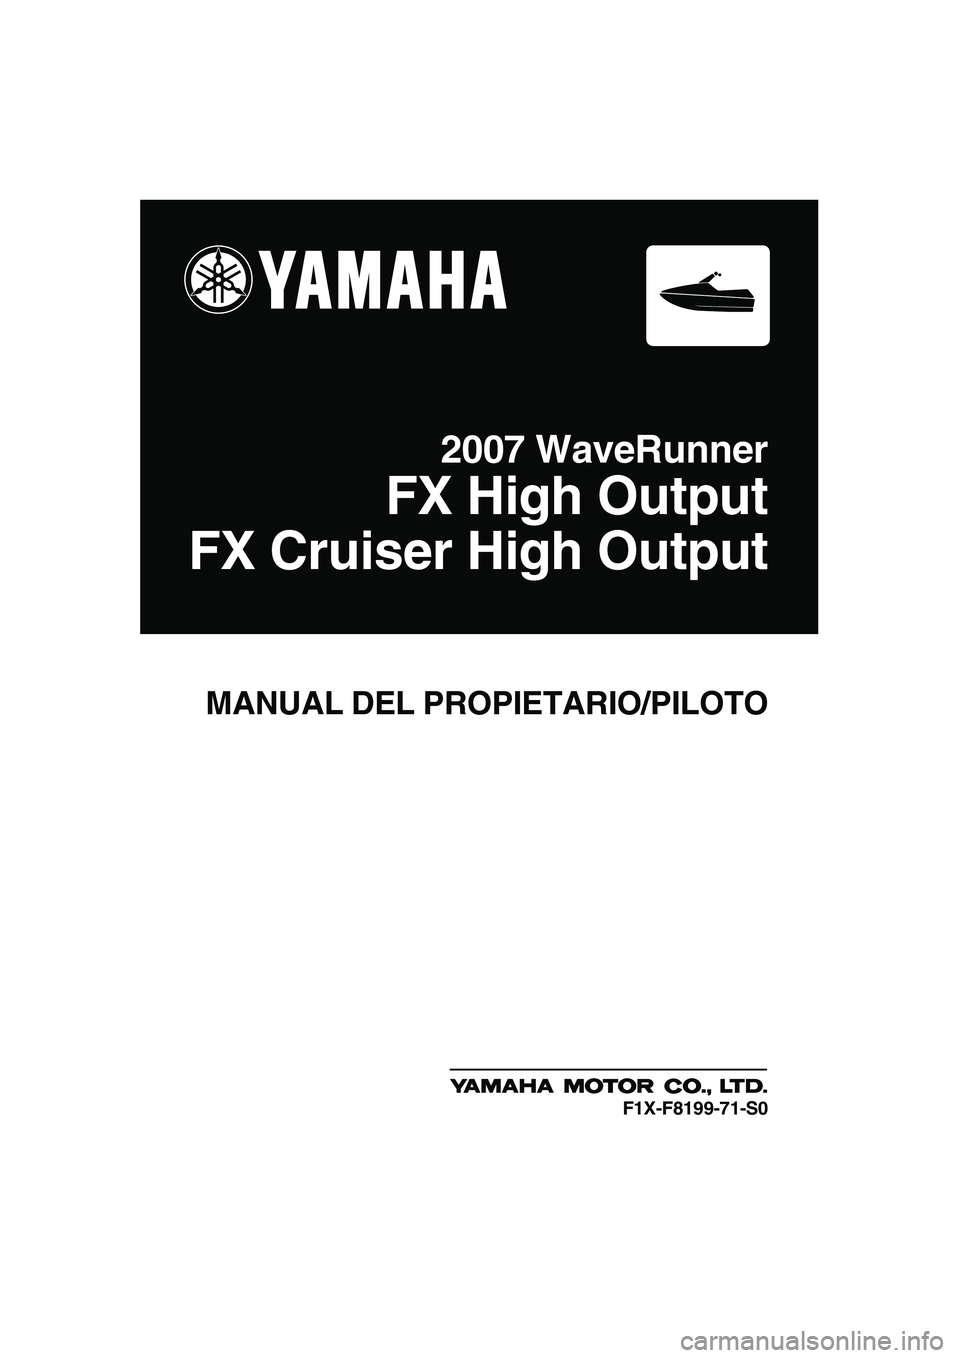 YAMAHA FX HO CRUISER 2007  Manuale de Empleo (in Spanish) MANUAL DEL PROPIETARIO/PILOTO
2007 WaveRunner
FX High Output
FX Cruiser High Output
F1X-F8199-71-S0
UF1X71S0.book  Page 1  Wednesday, September 27, 2006  1:14 PM 